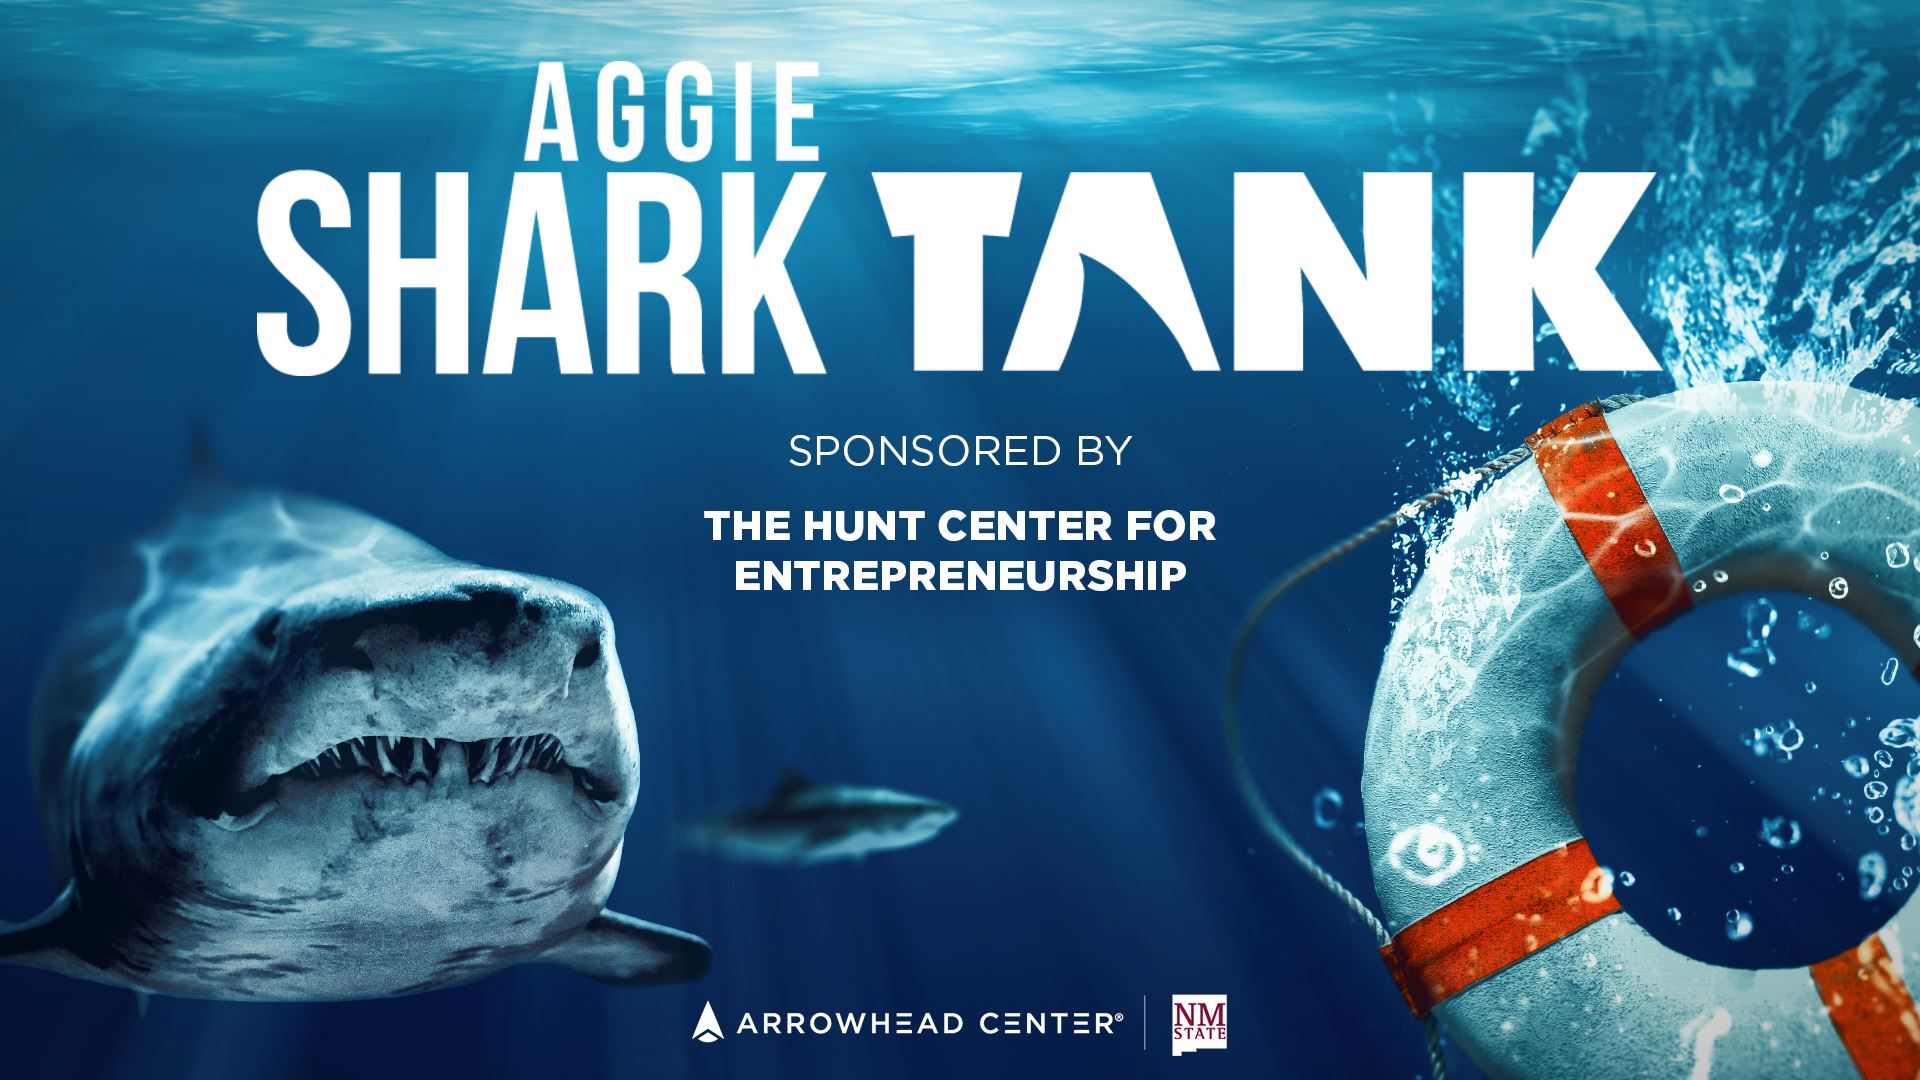 Missouri S&T graduate appears on ABC's 'Shark Tank,' receives offer -  Missouri S&T – News and Events